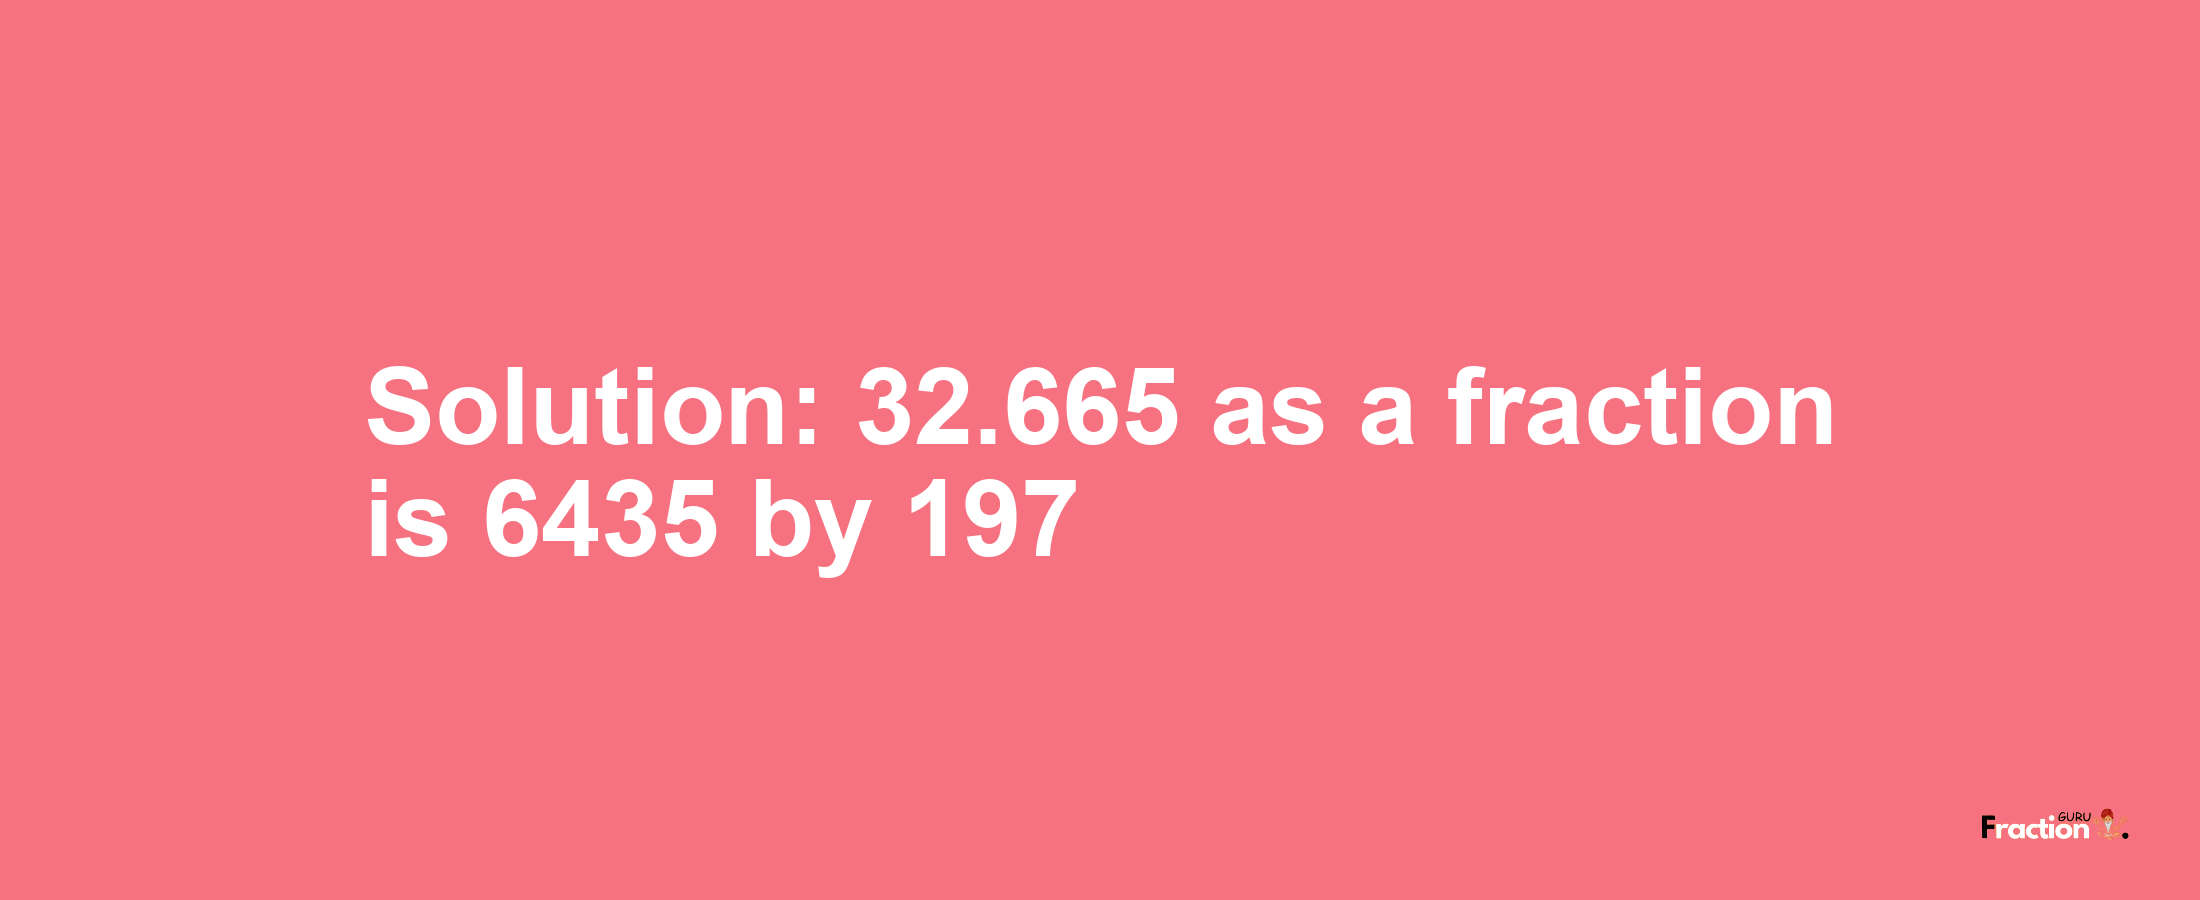 Solution:32.665 as a fraction is 6435/197